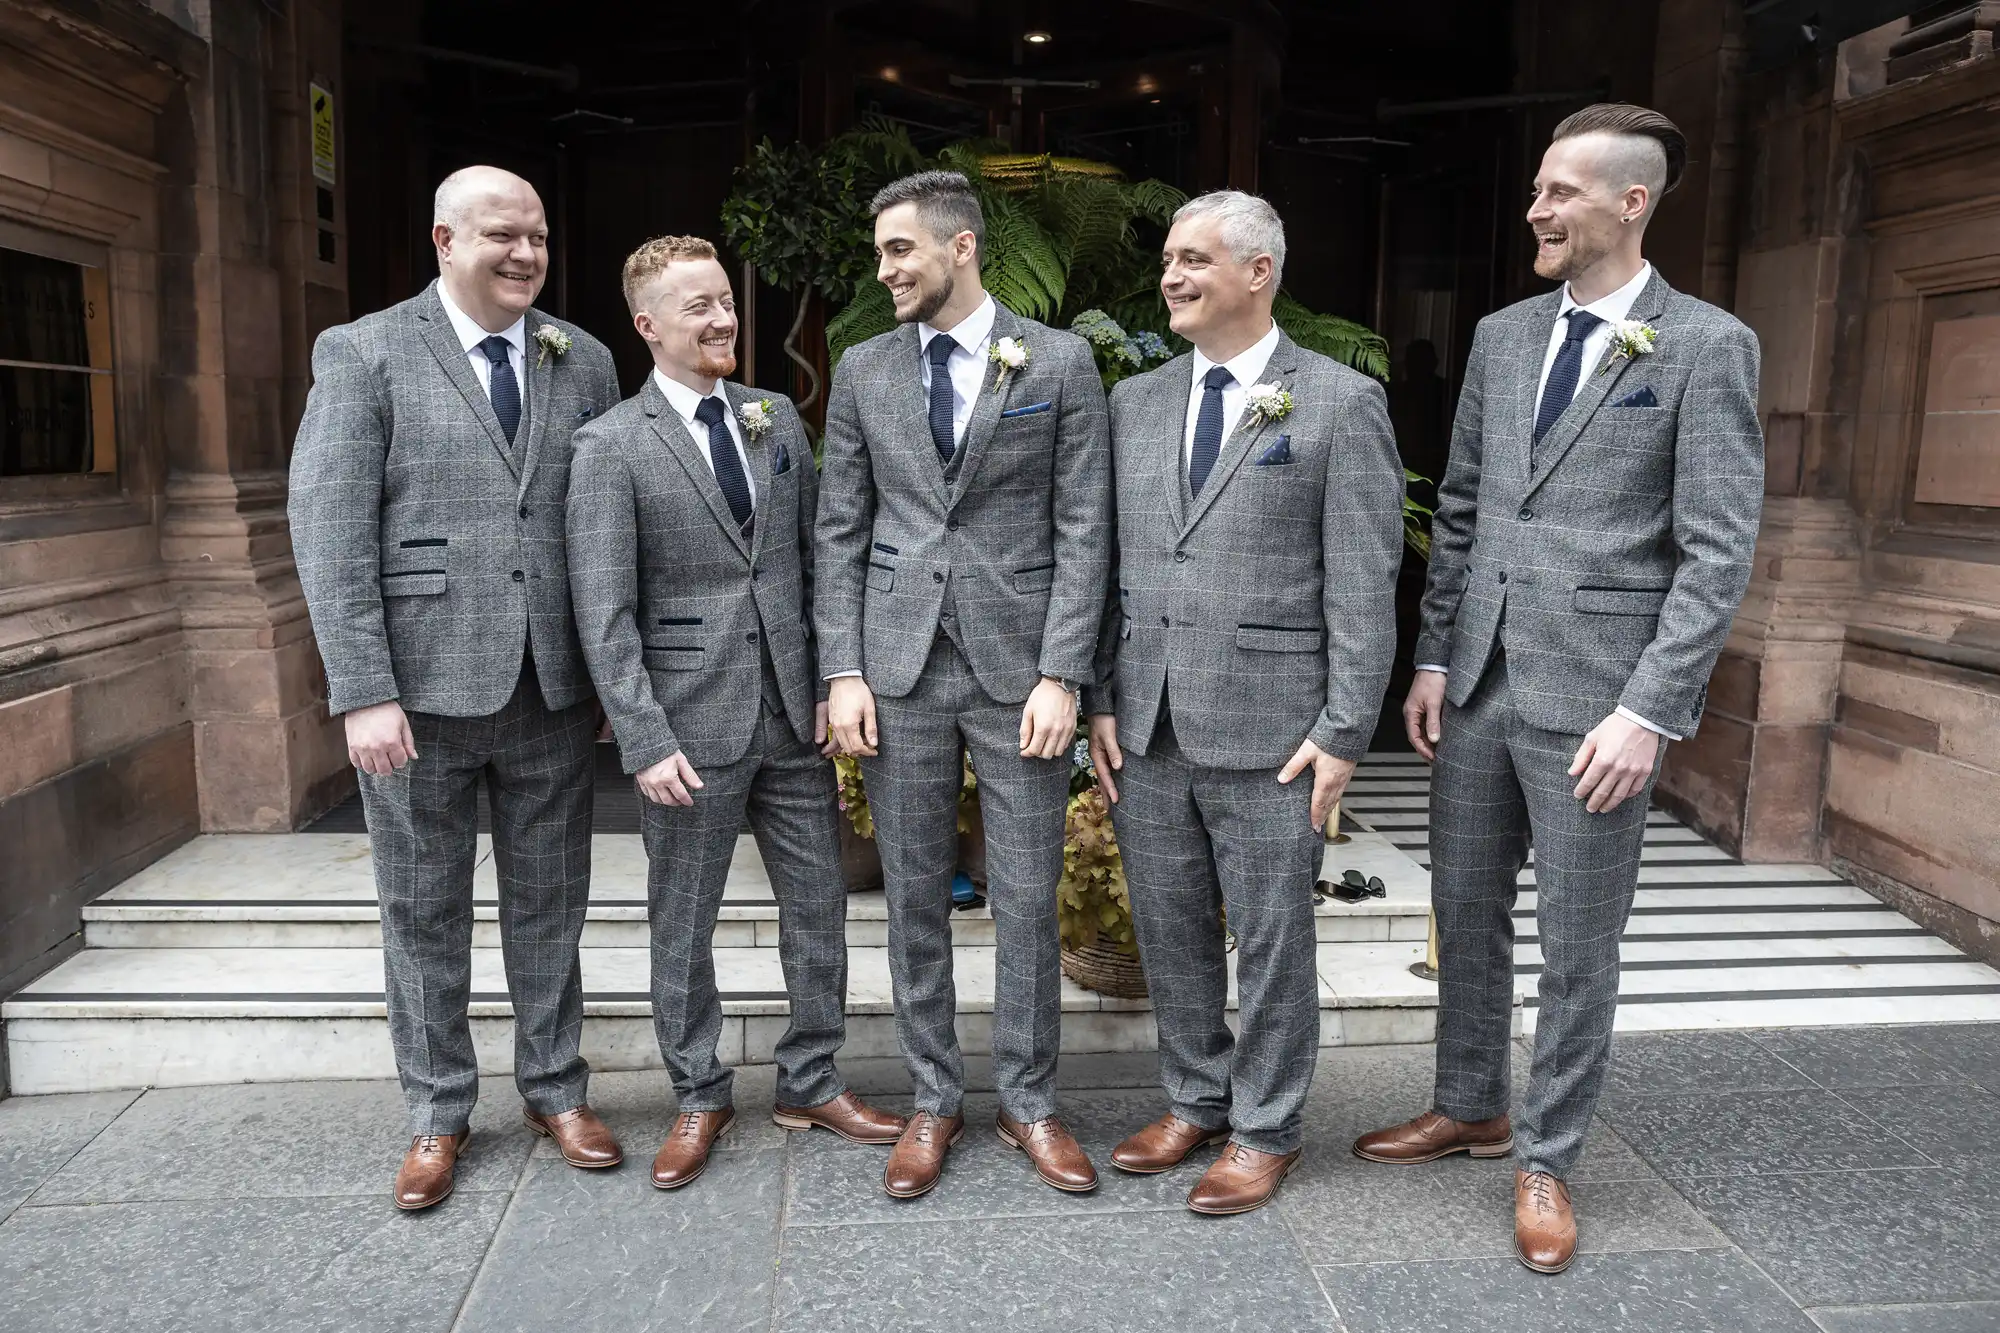 Five men in matching gray suits and brown shoes, standing on steps and smiling, each with a boutonniere on their lapels.